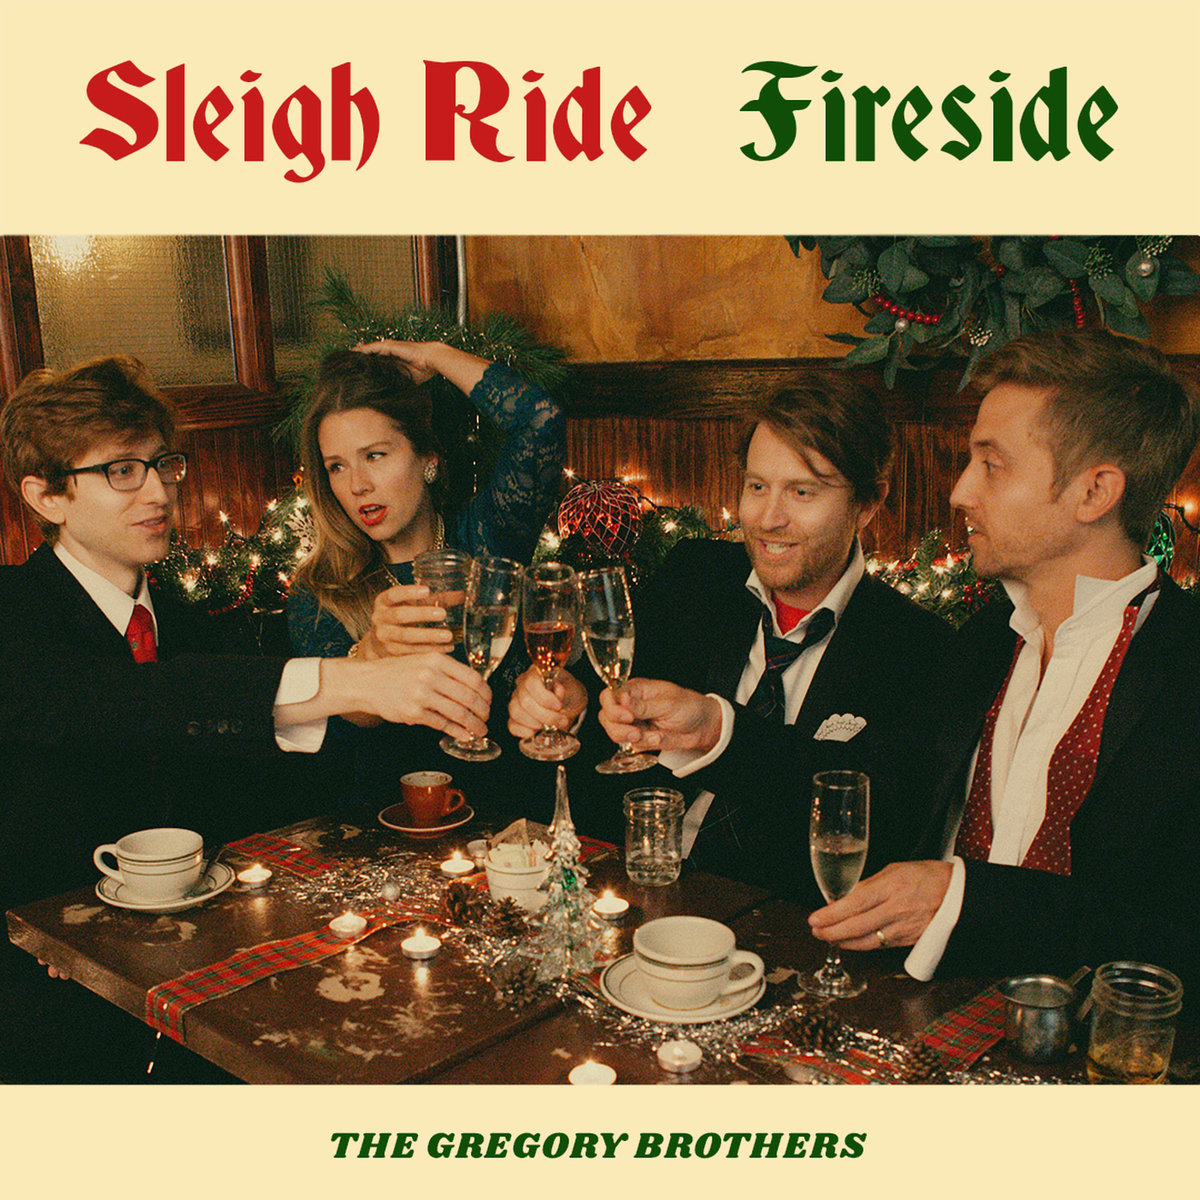 The Gregory Brothers - Sleigh Ride : Fireside